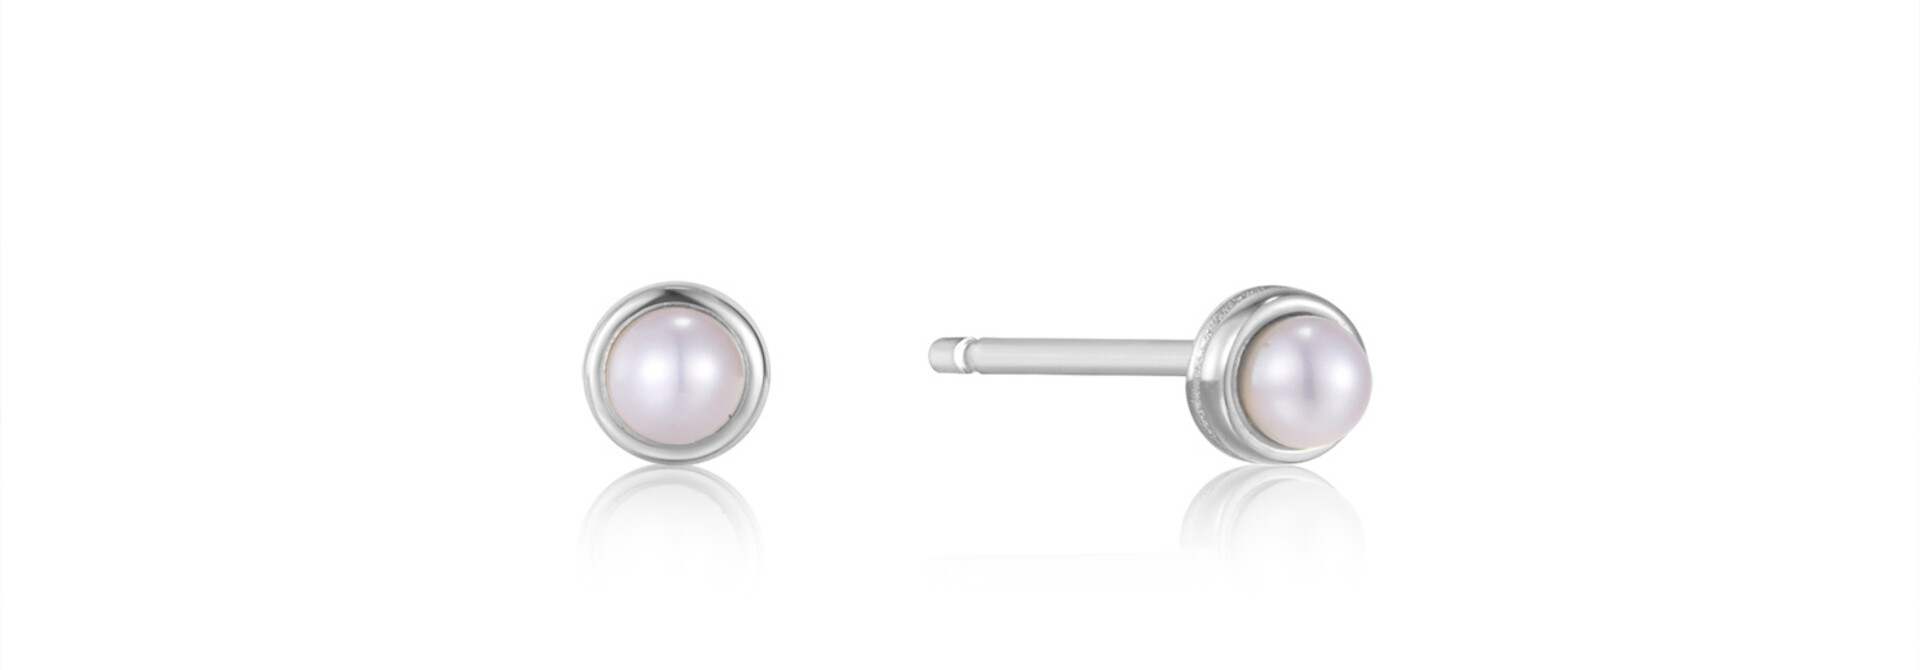 Pearl Cabochon Studs - Zilver